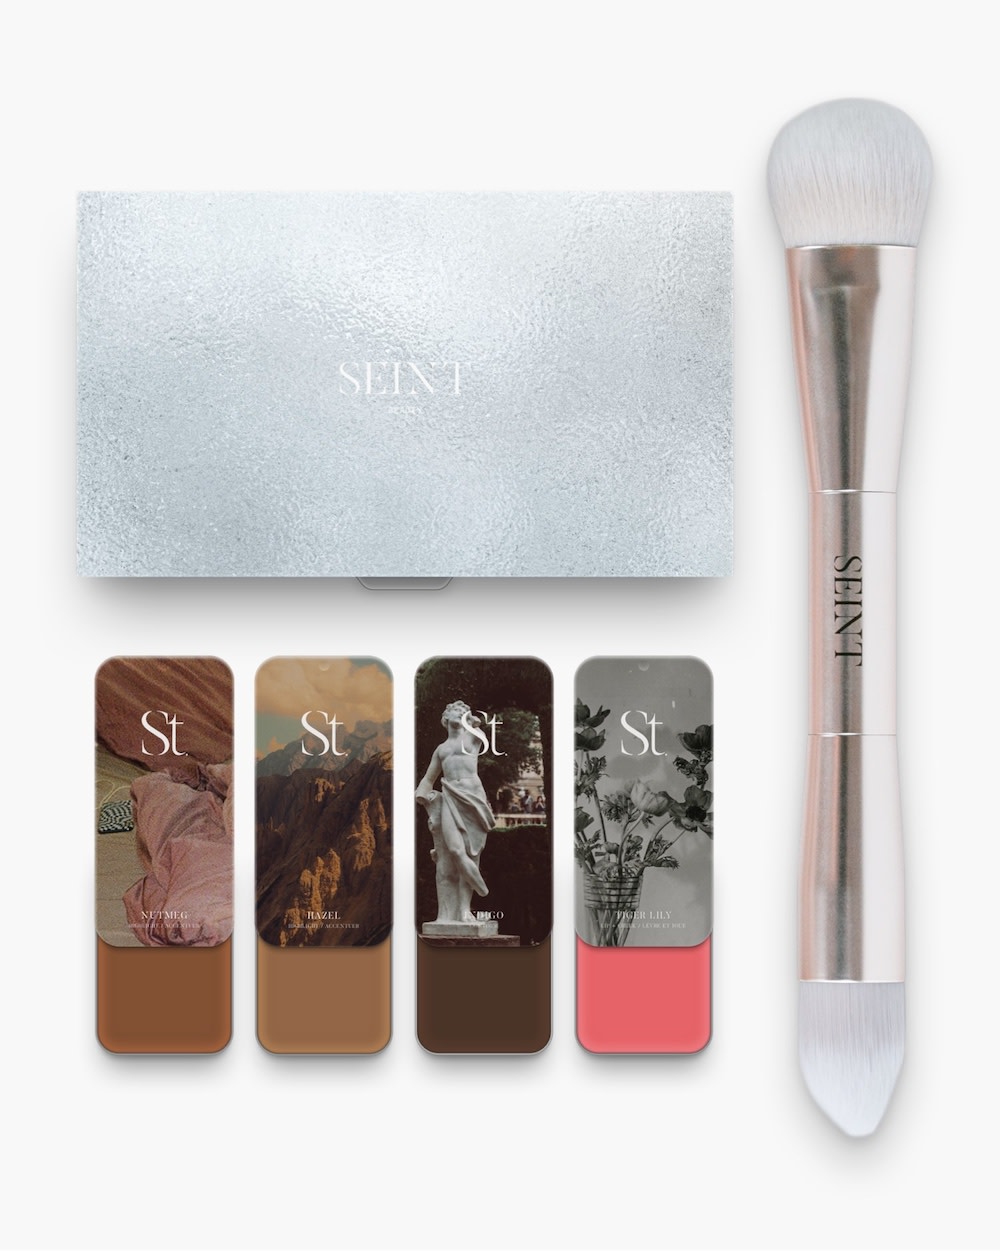 Seint Collections: No Color Match Needed